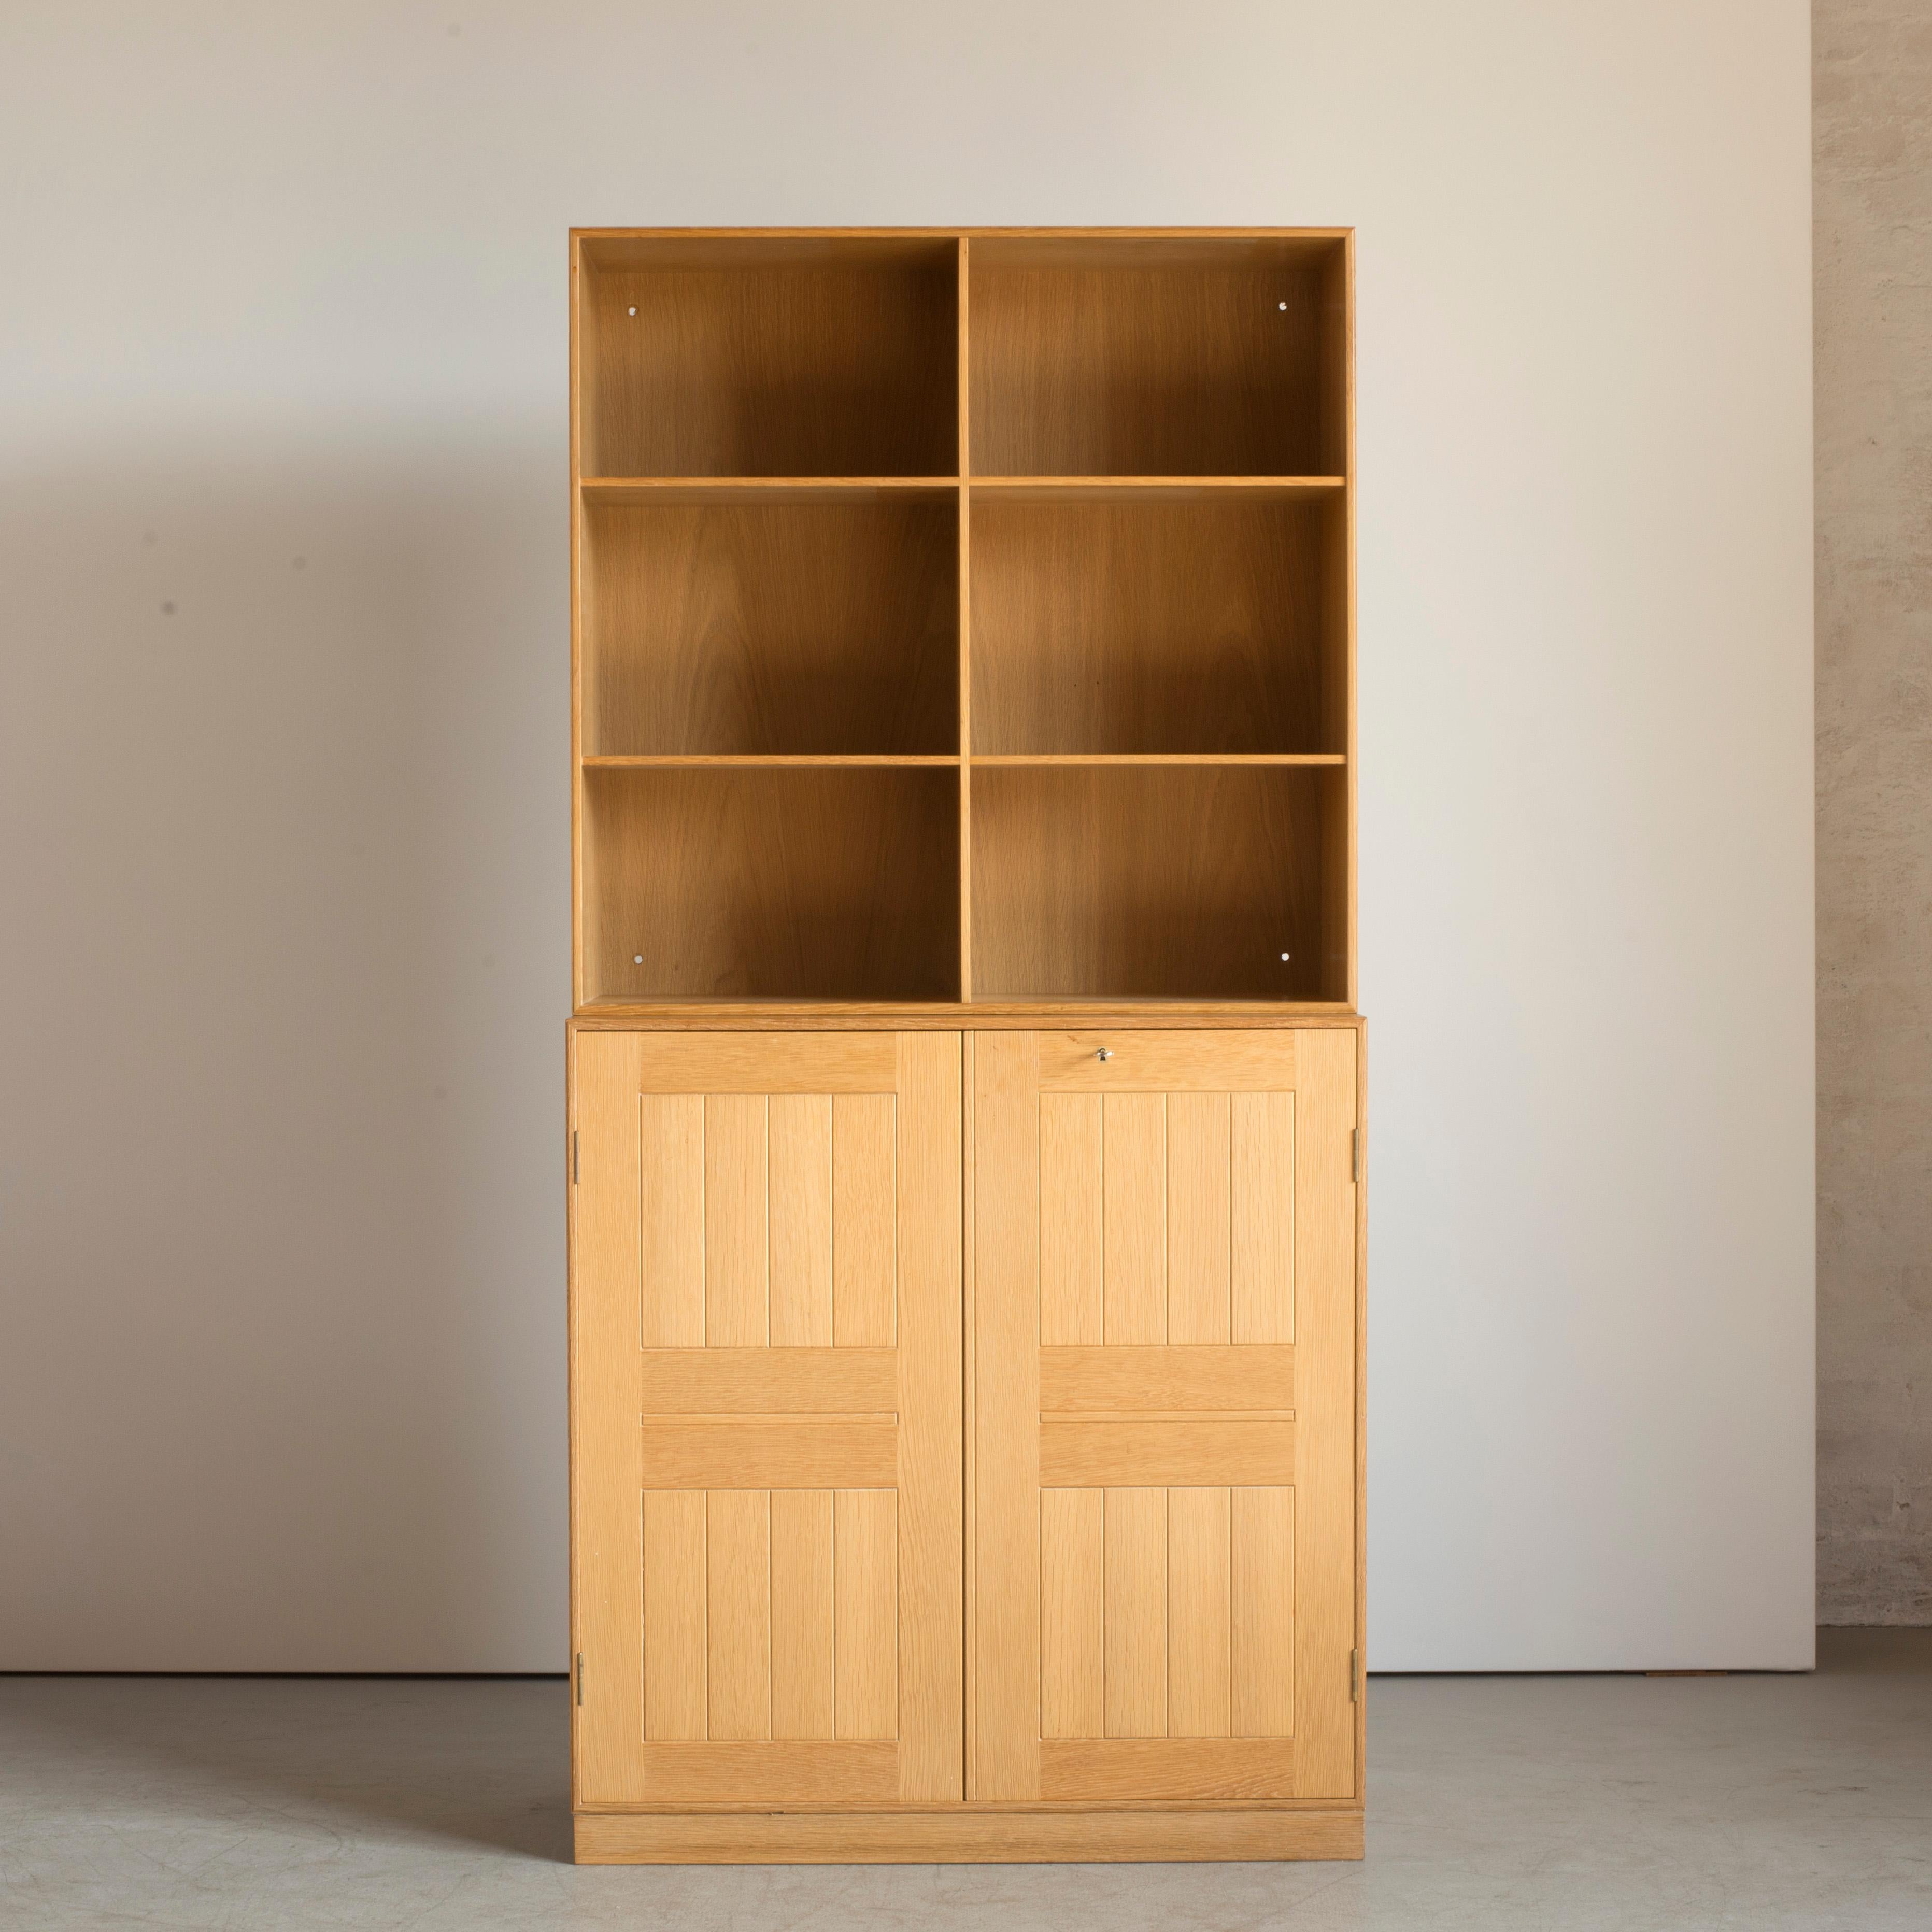 Mogens Koch cabinet with plinth and a wall-mounted bookcase. Executed by Rud. Rasmussen.

Reverse with paper labels ‘RUD. RASMUSSENS/SNEDKERIER/COPENHAGEN/DENMARK.